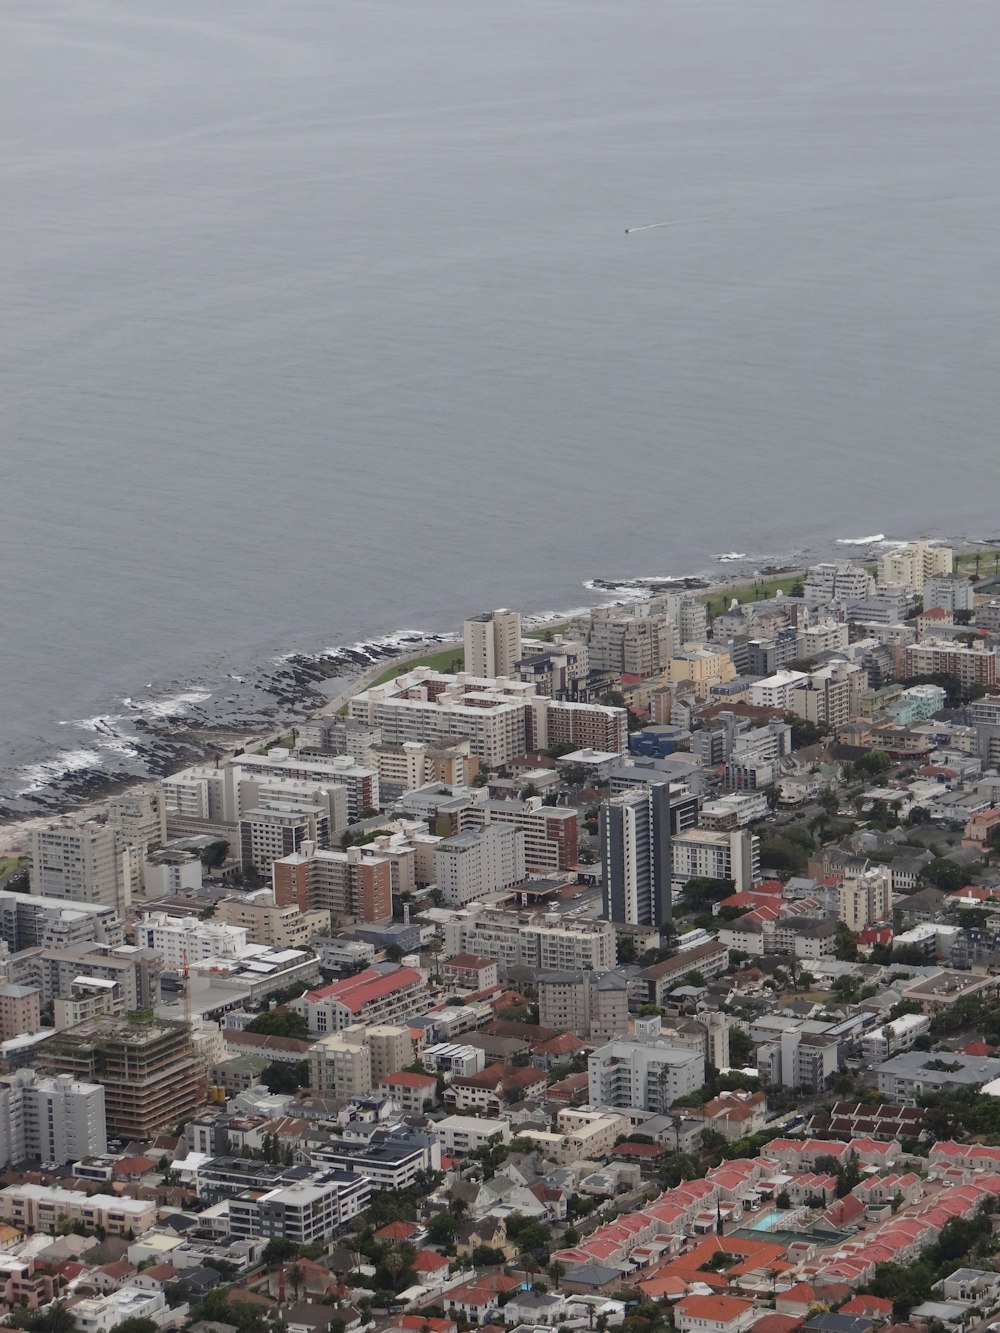 an aerial view of a city with a body of water in the background